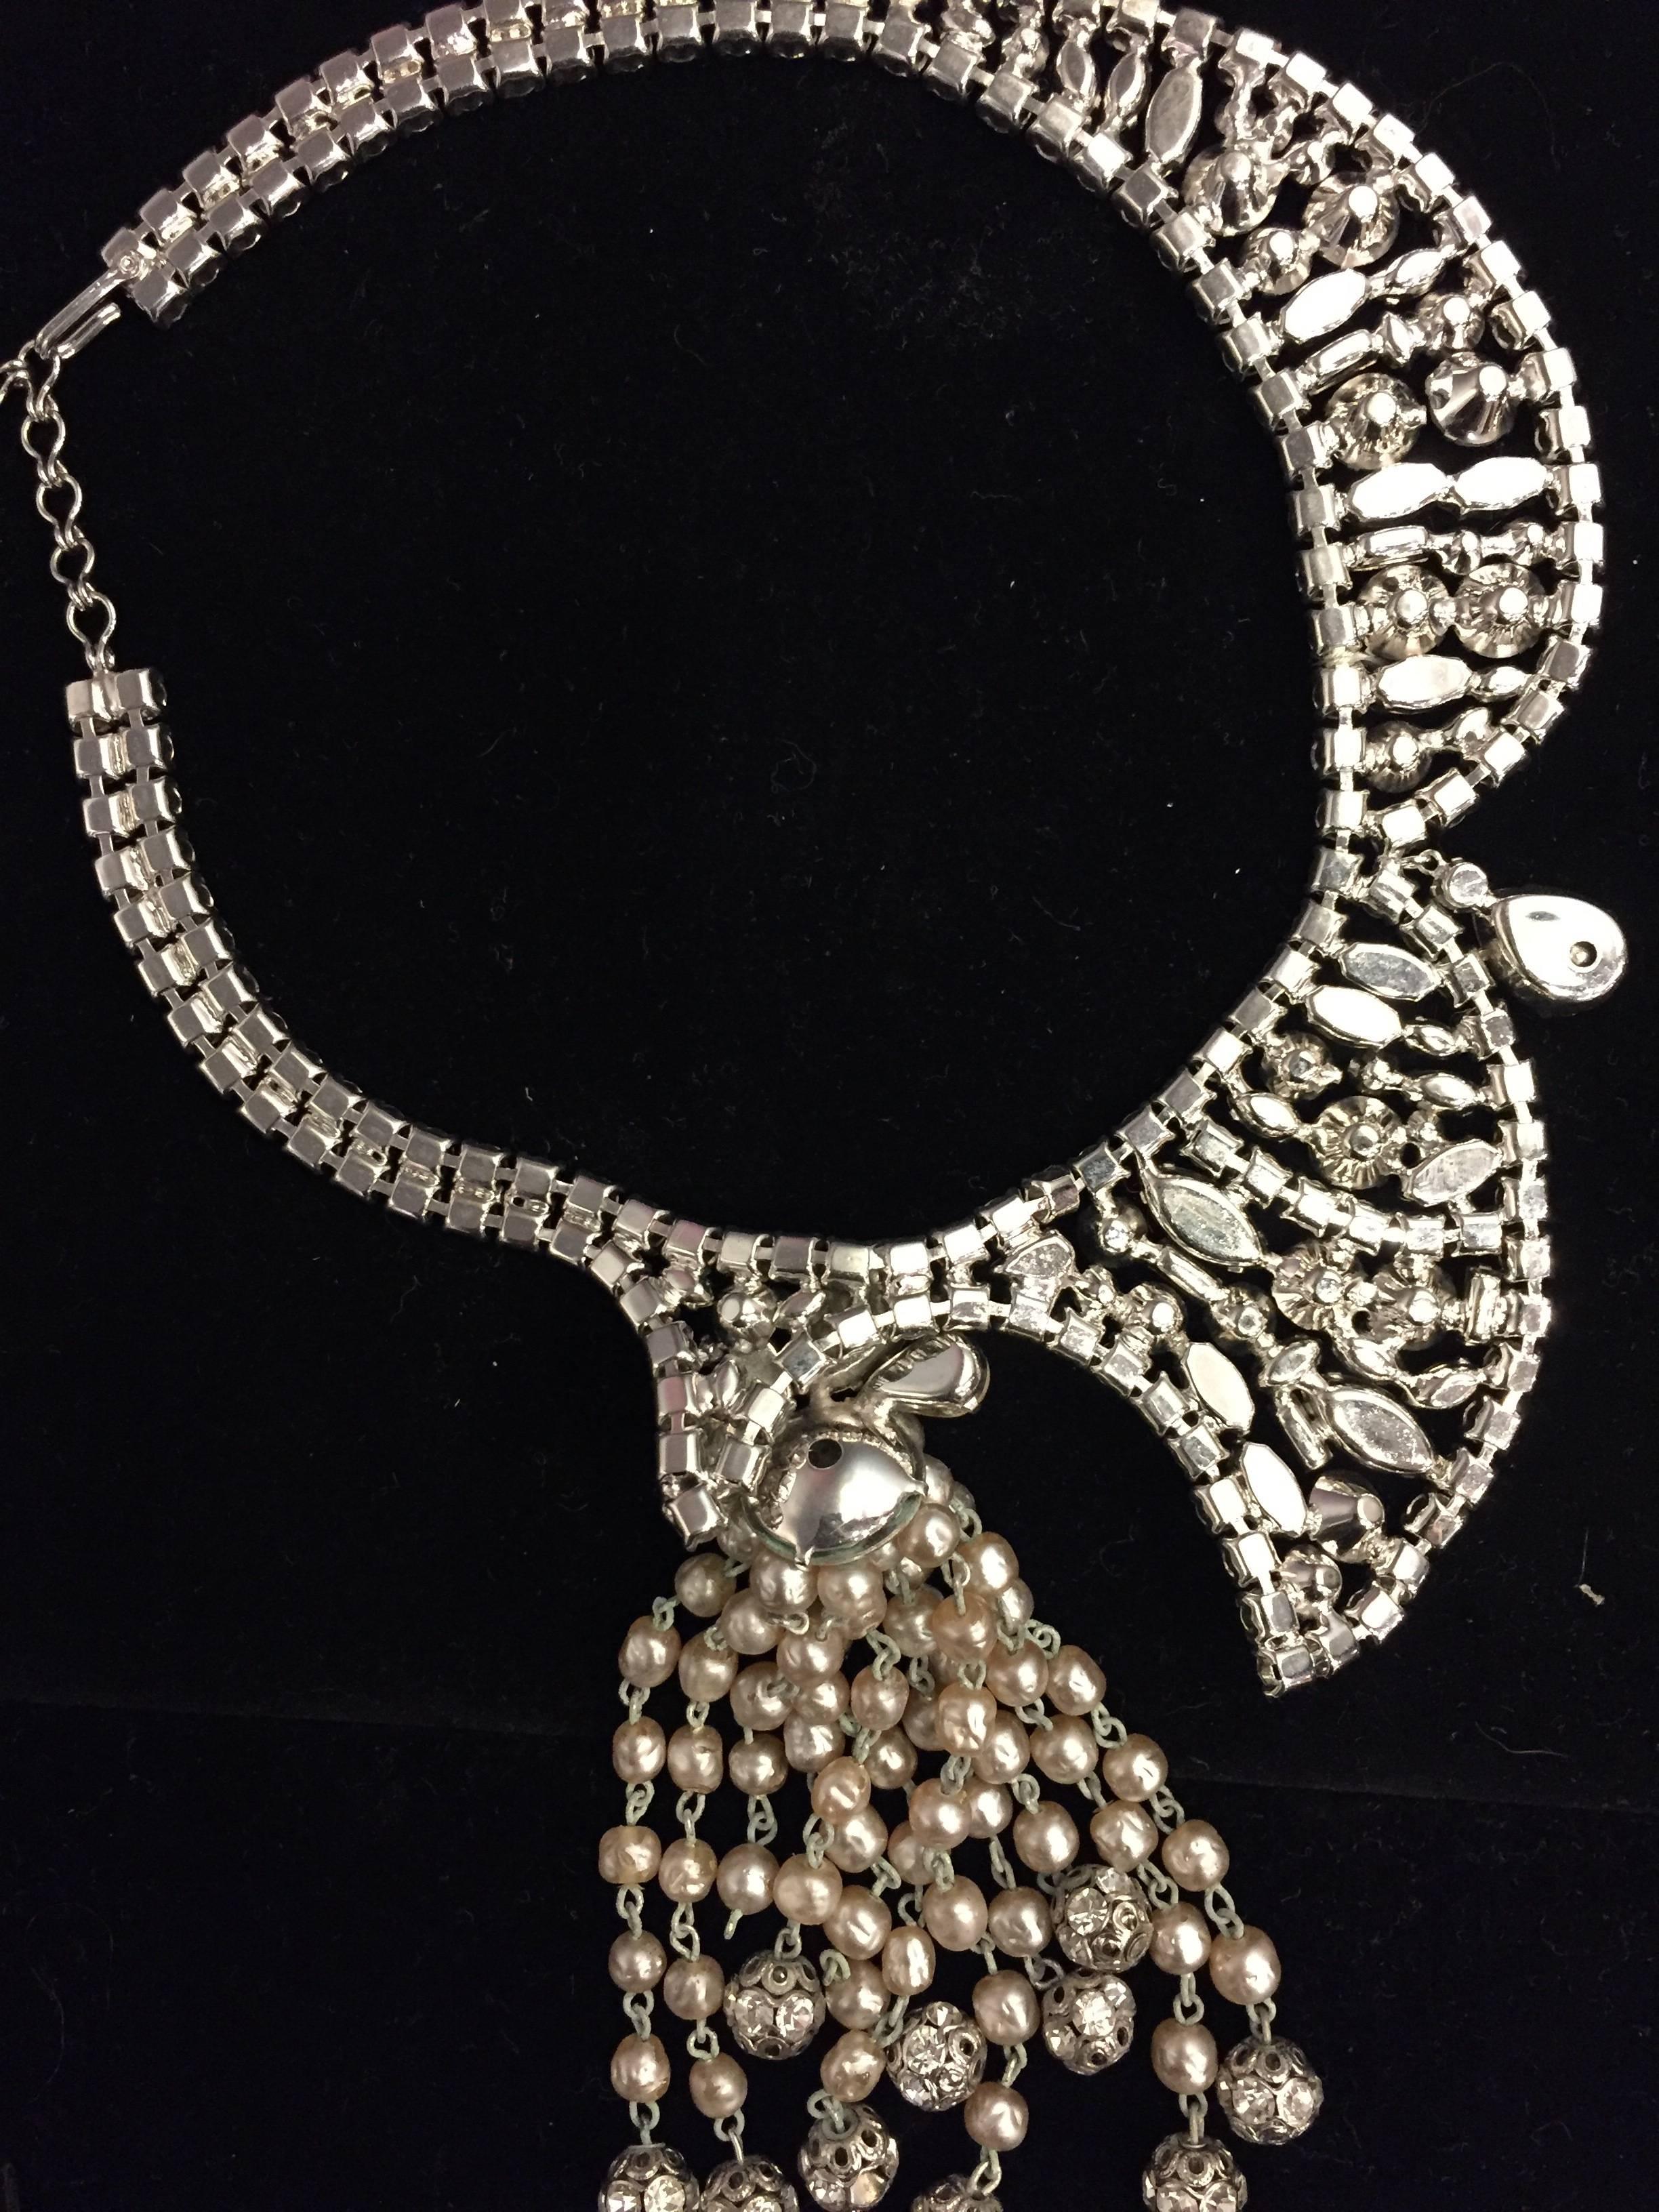 A wonderful and unusually designed 1950s asymmetrical cascading tassel necklace and earring set in faux pearls and rhinestones. 